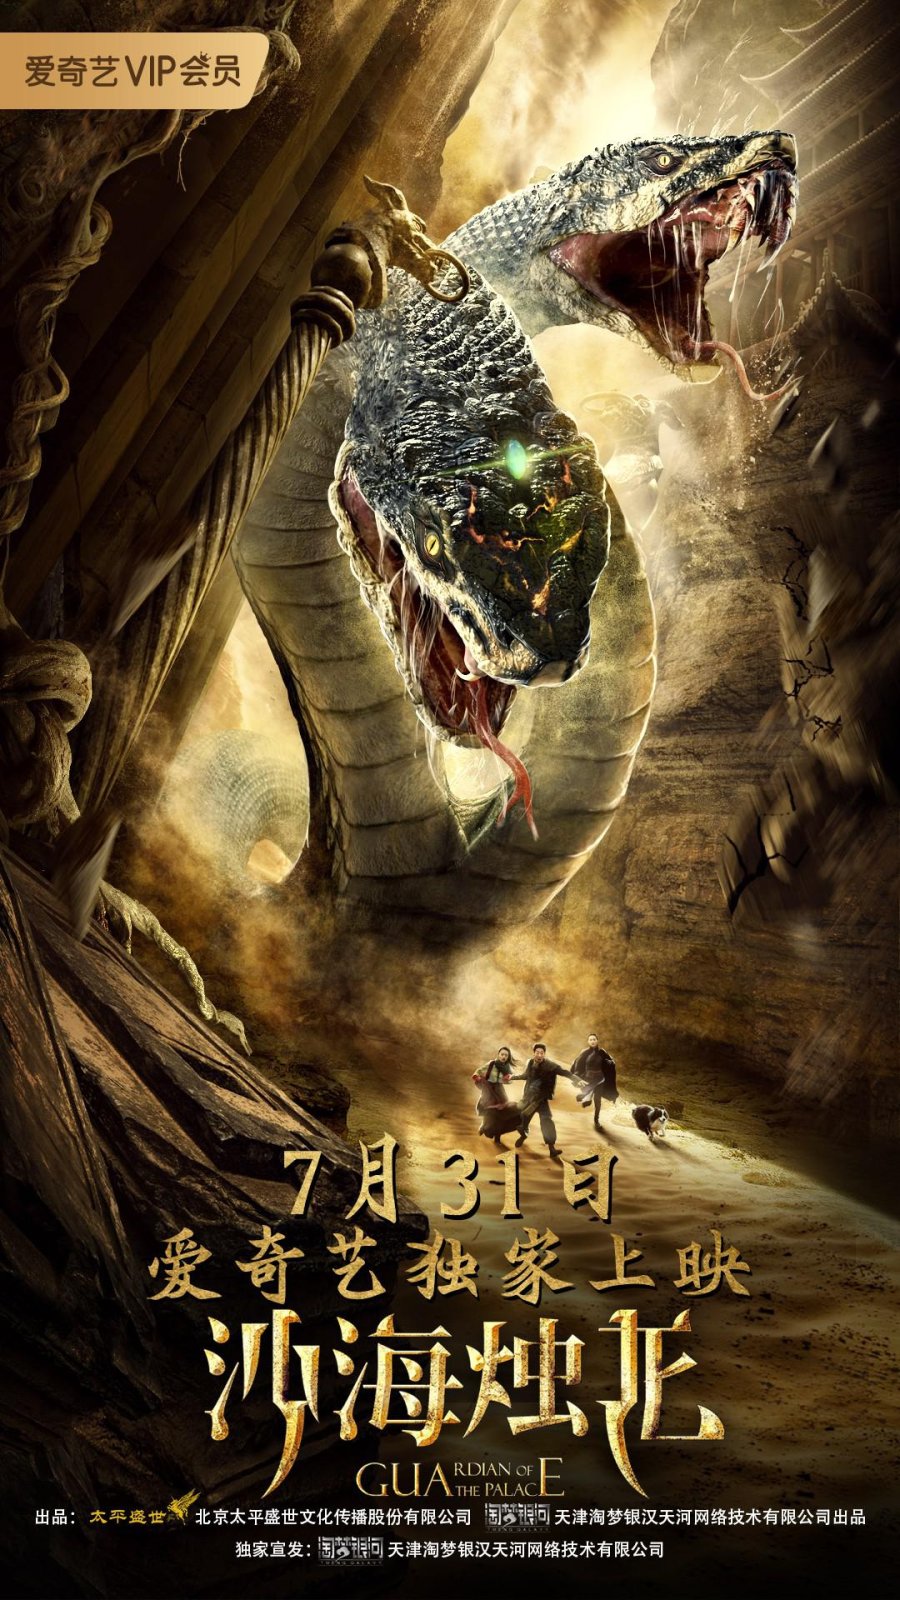 image poster from imdb - ​Guardian of the Palace (2020)